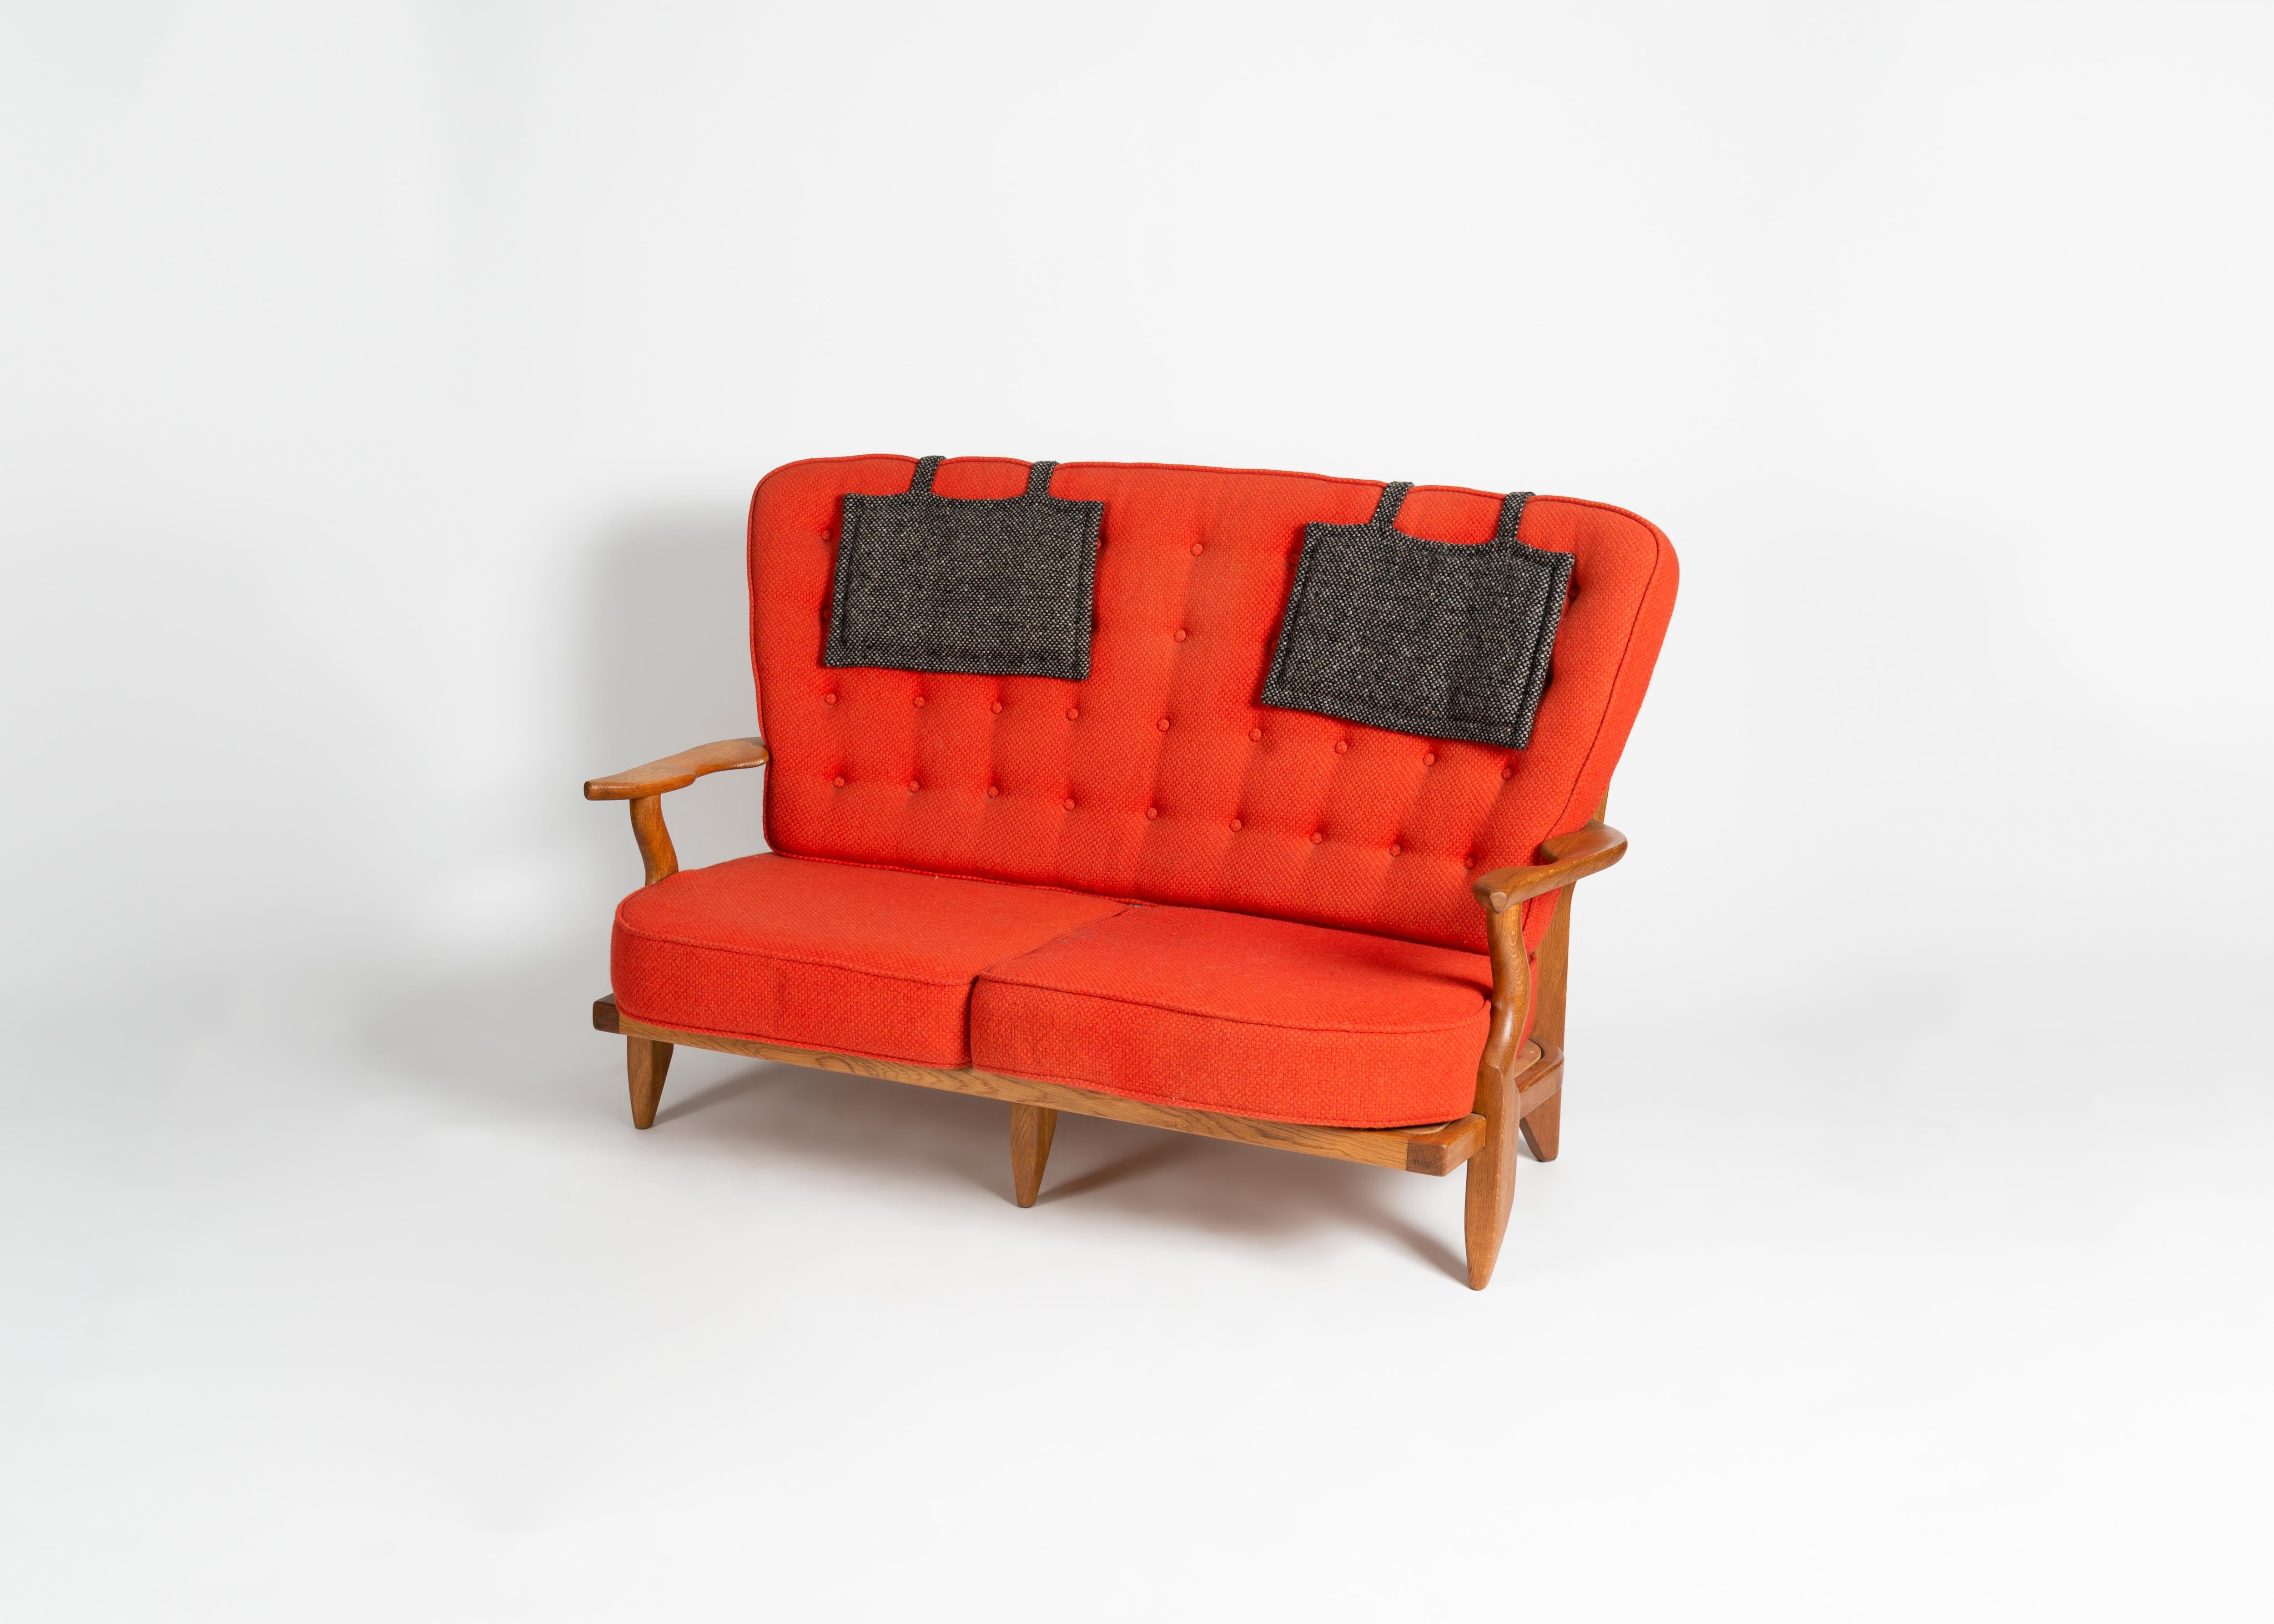 Robert Guillerme studied design and architecture at the École Boule, graduating in 1934. After the Second World War he moved to Lille, in the north of France, where he decorated homes and designed furniture for the well regarded Rogier